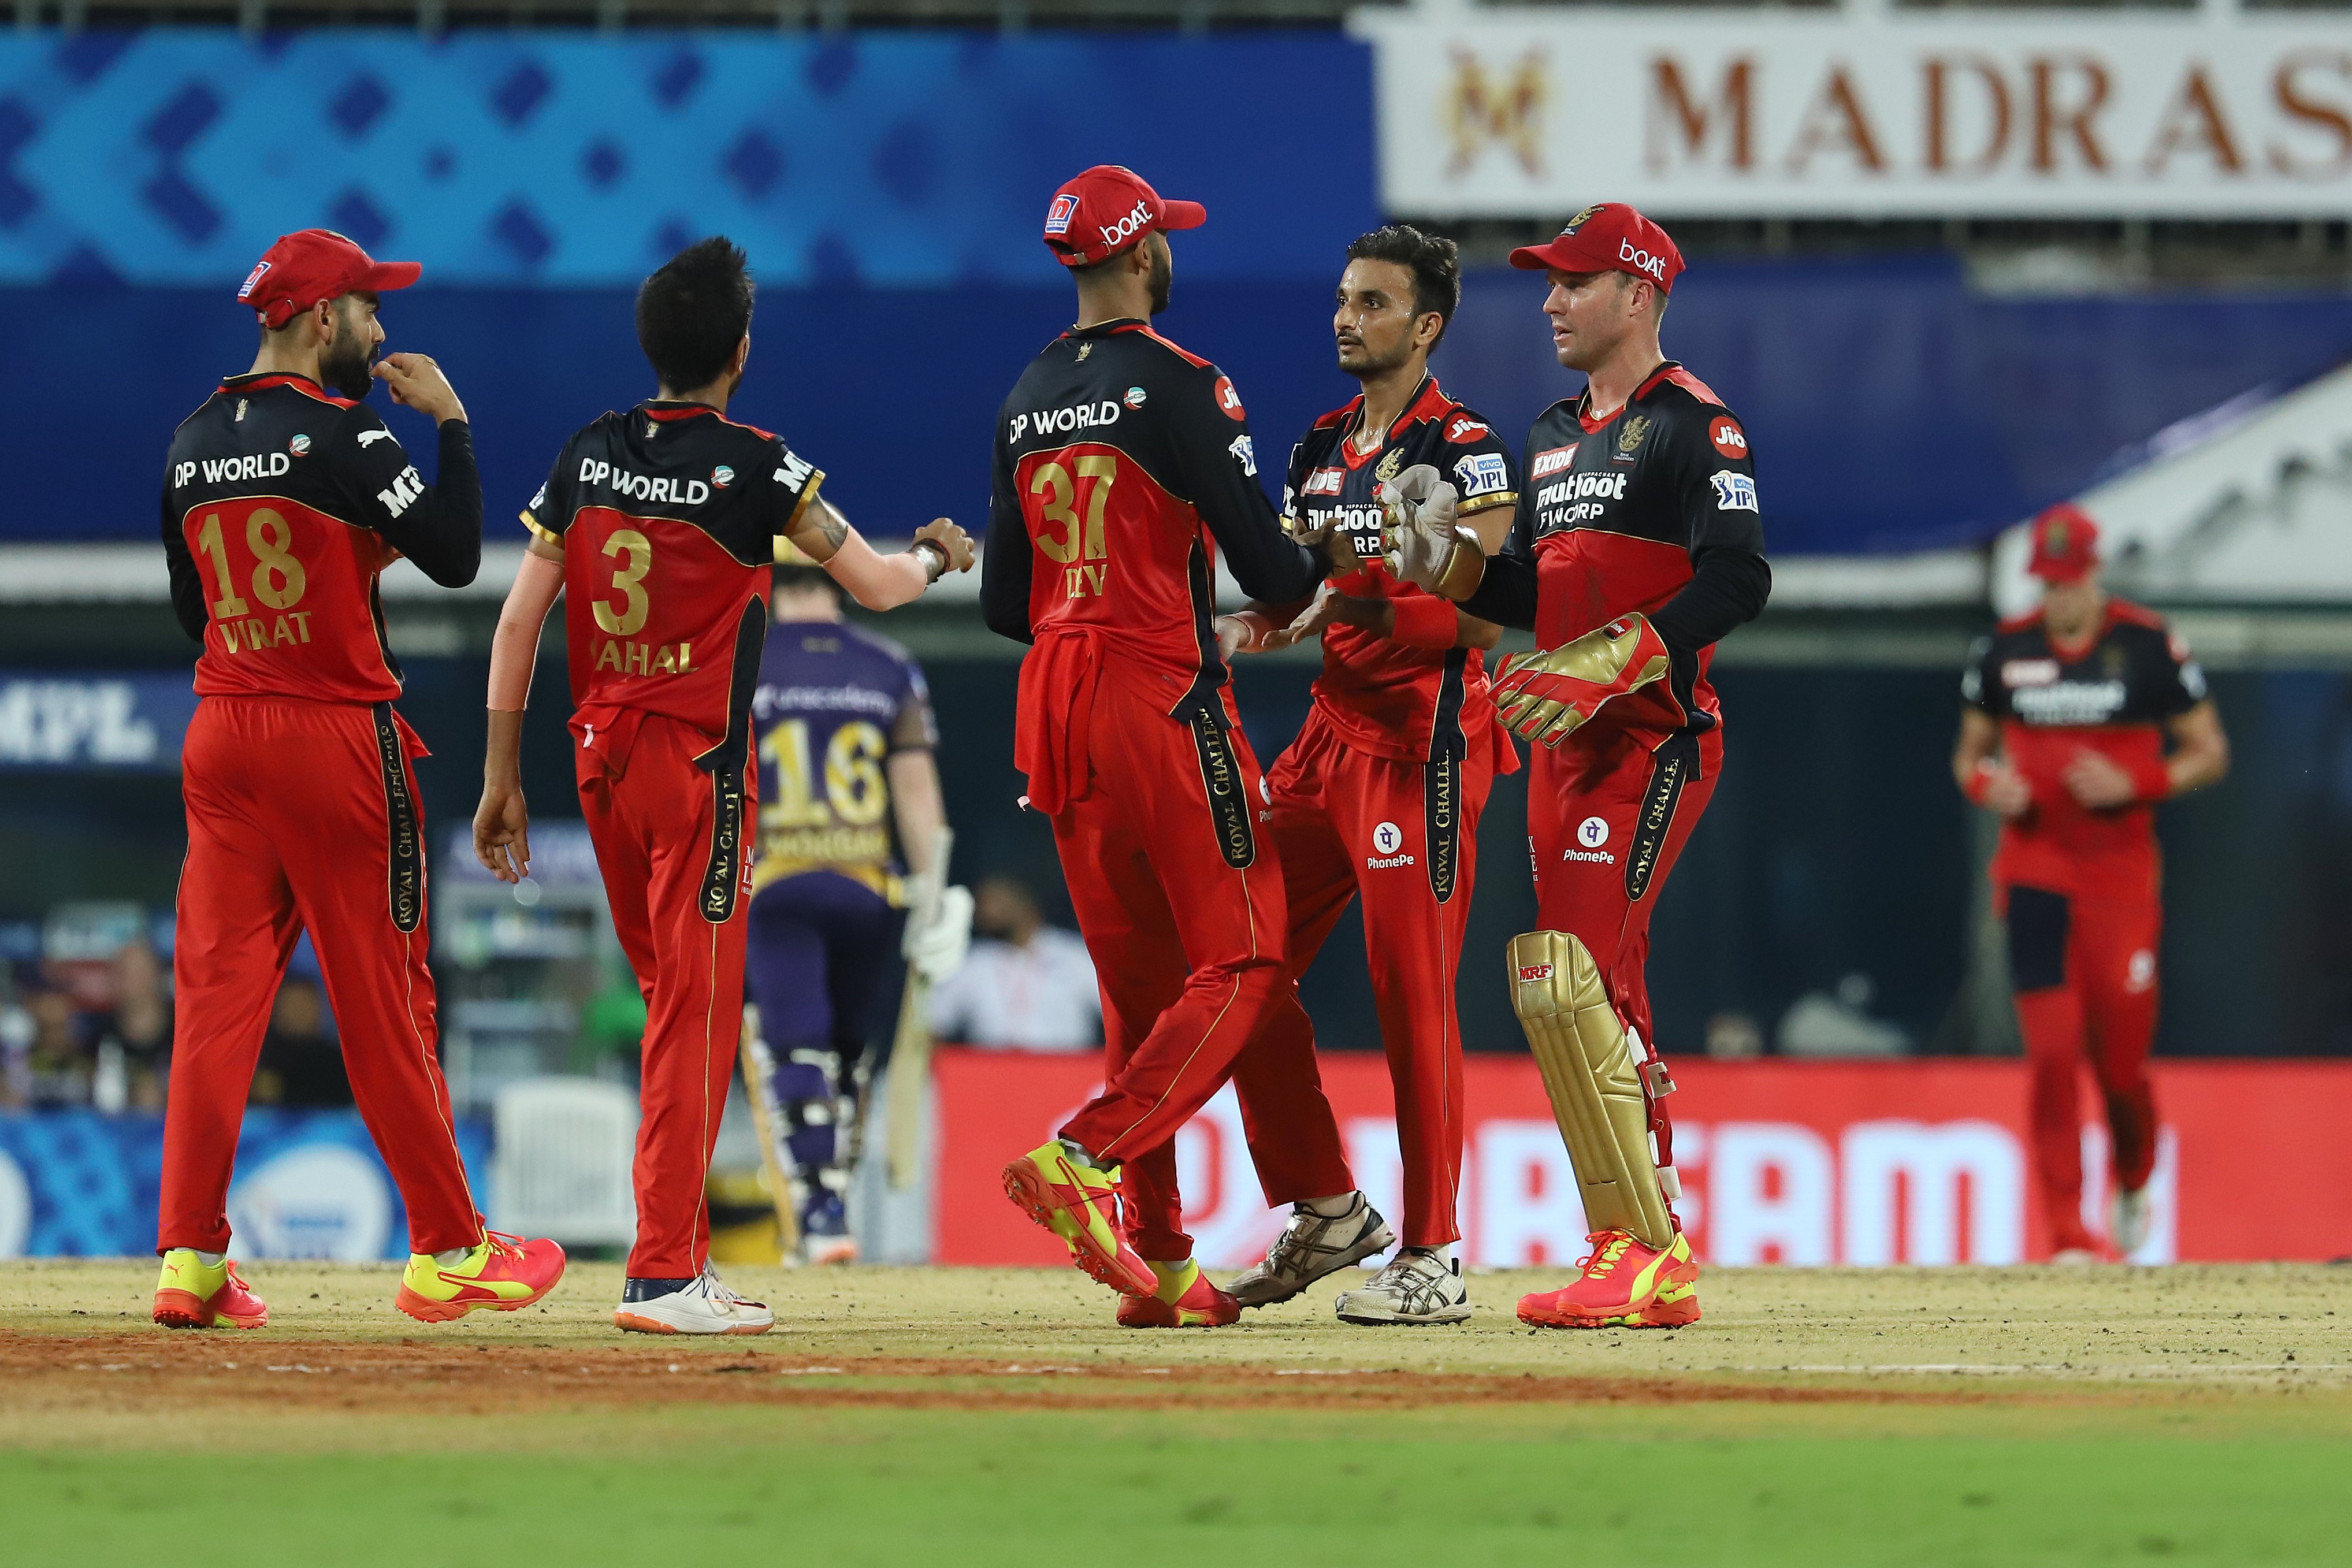 De Villiers, Maxwell power Royal Challengers to 3rd straight win in IPL 2021